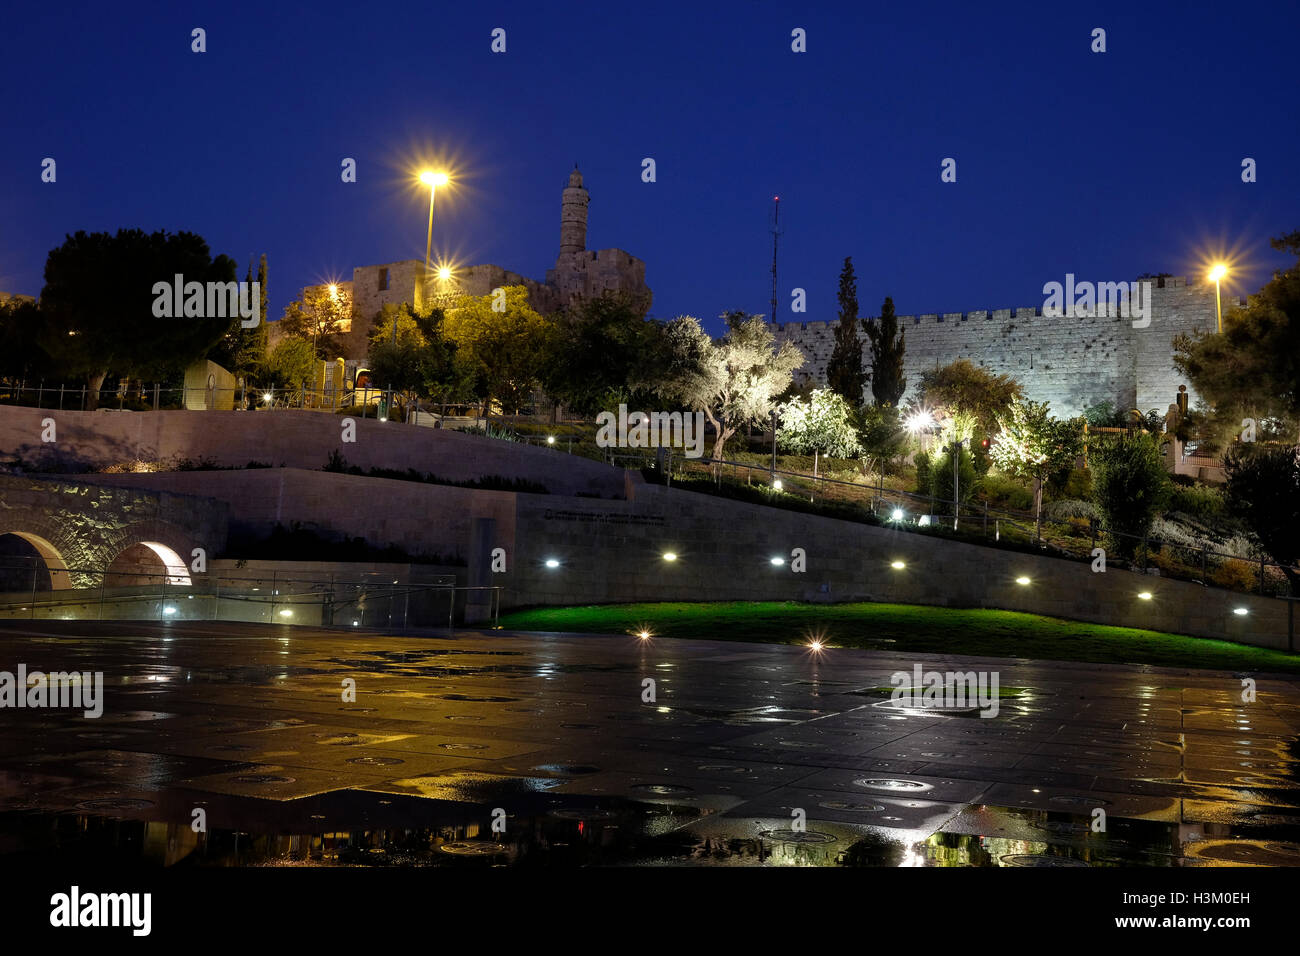 View at twilight of King David citadel from Teddy Park named after Teddy Kollek who was Mayor of Jerusalem at the foot of the Old City walls Jerusalem Israel Stock Photo